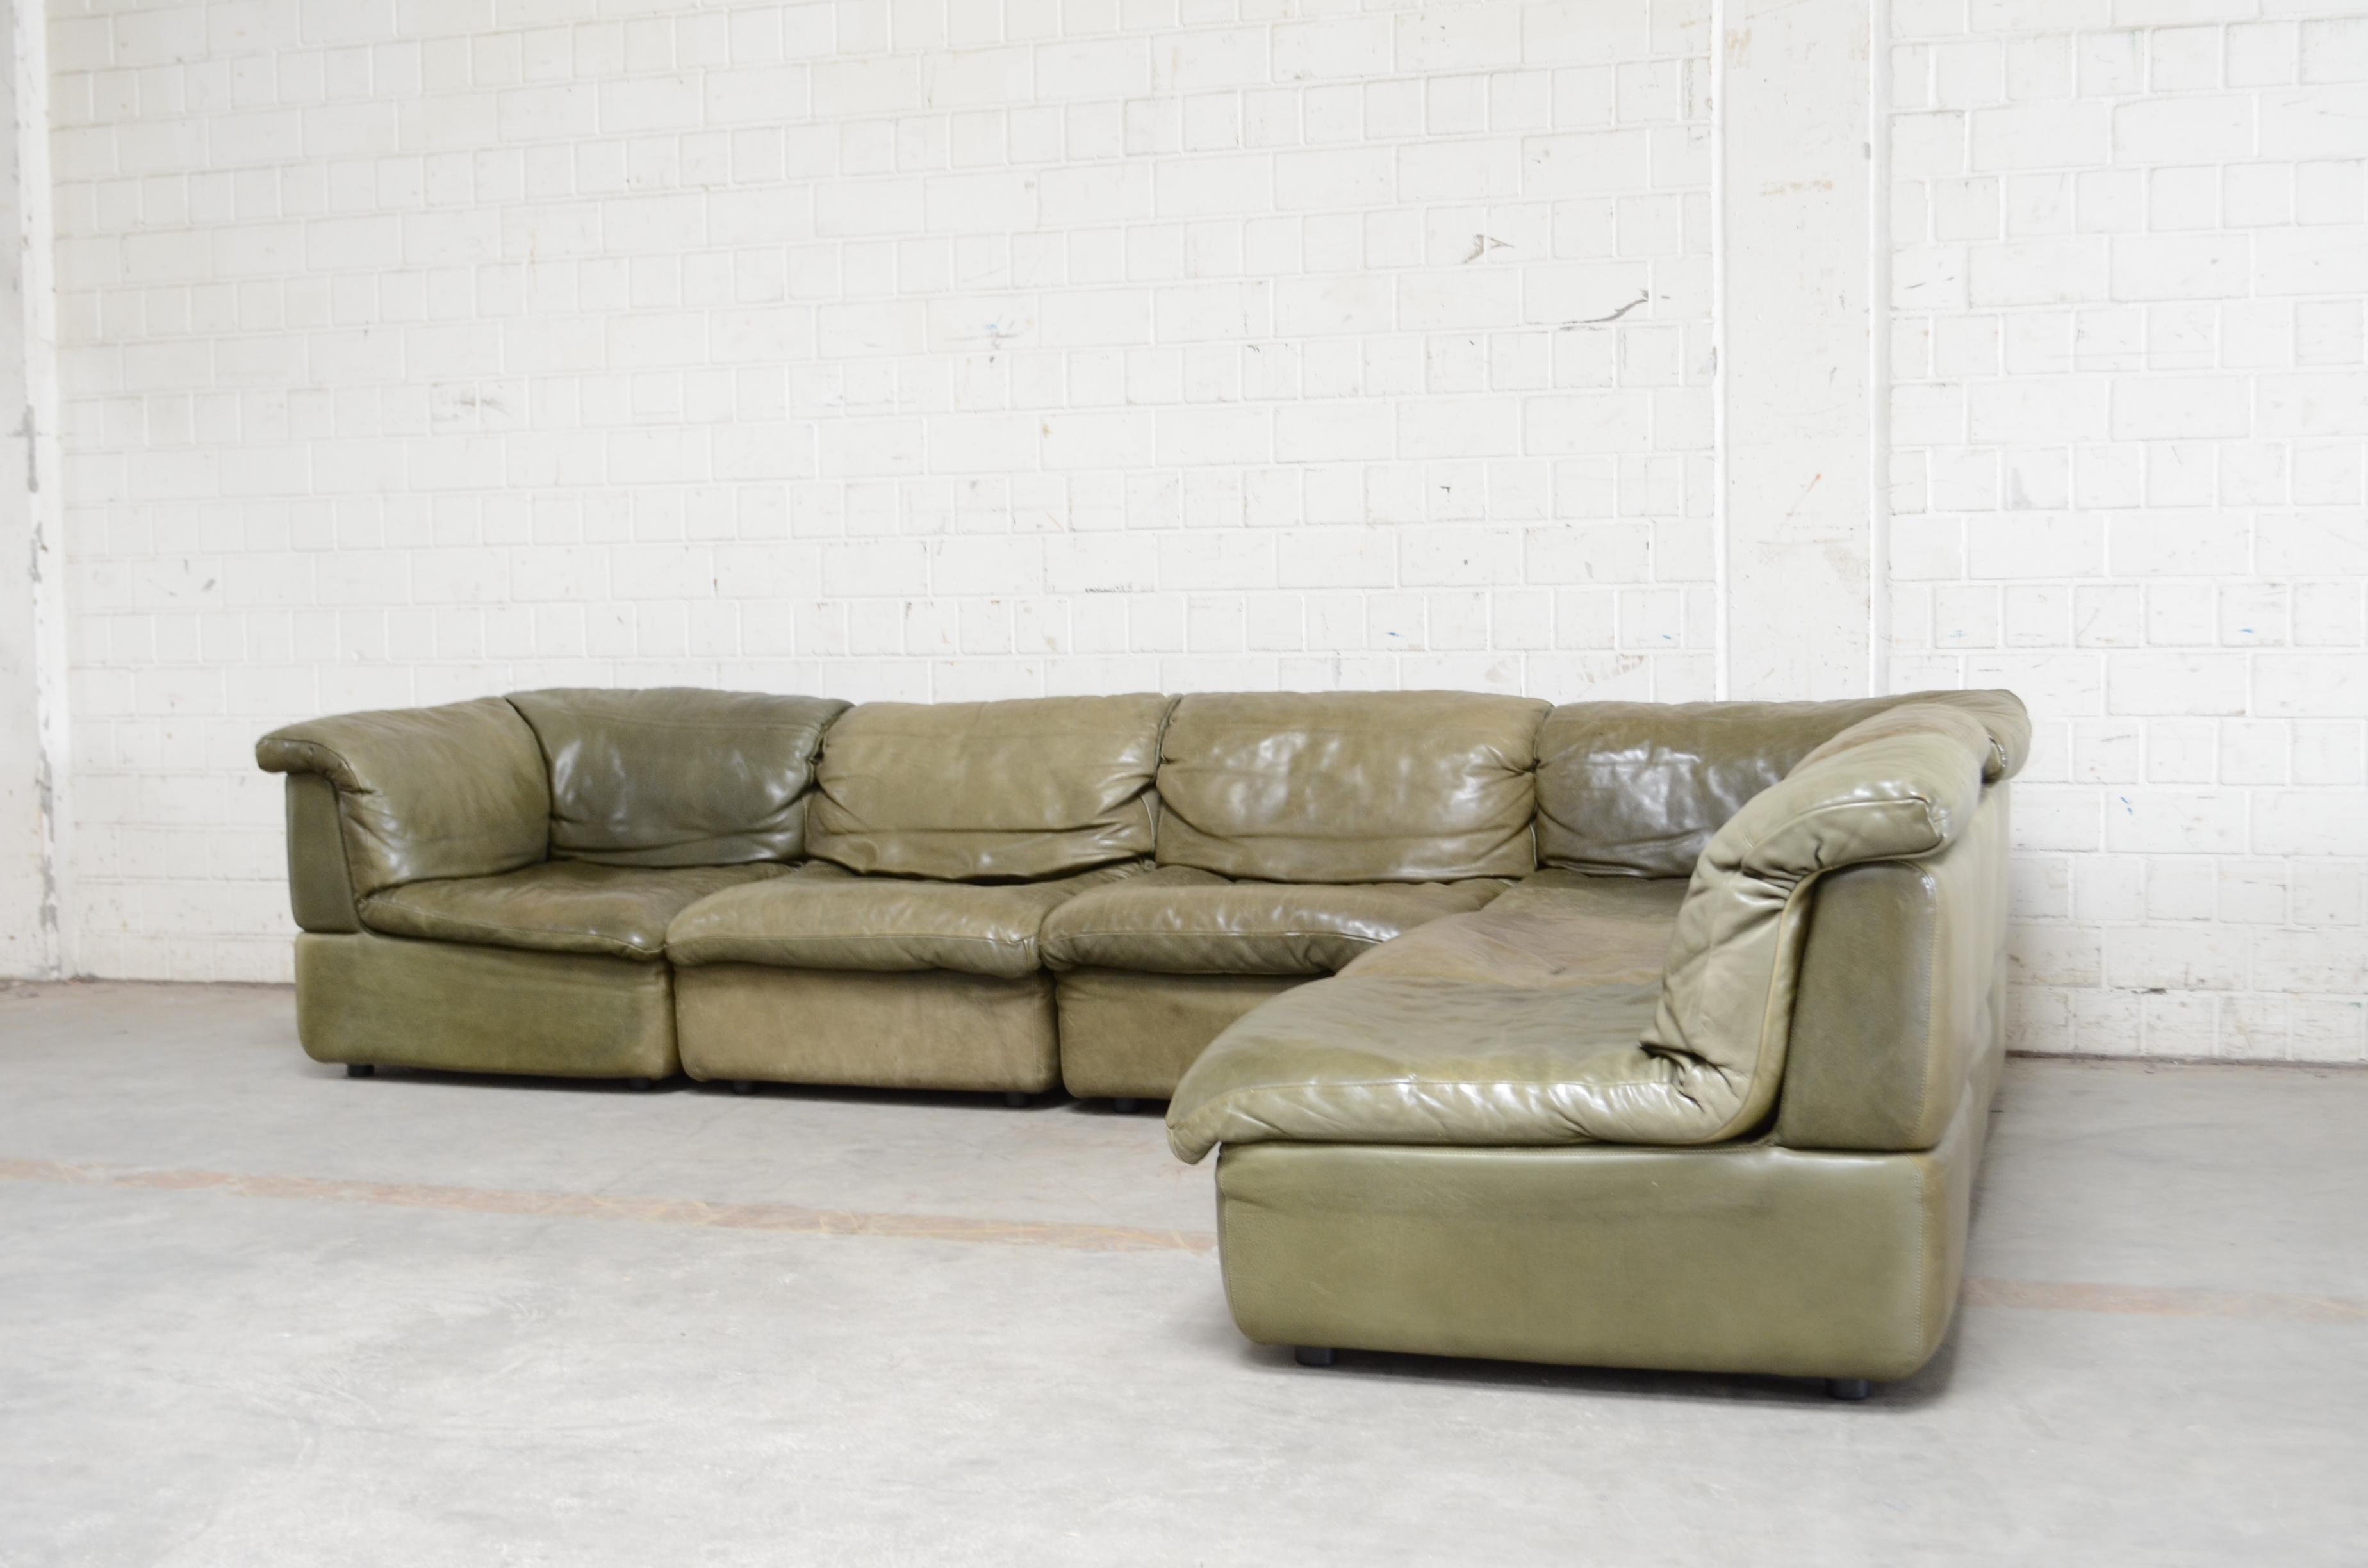 Rolf Benz manufactured this modular leather lounge sofa.
The leather is a thick olive/ limegreen color with a great leather touch.
It has a beautiful patina.
It contents 4 seating modules and 2 corner modules.
It can be connected under the